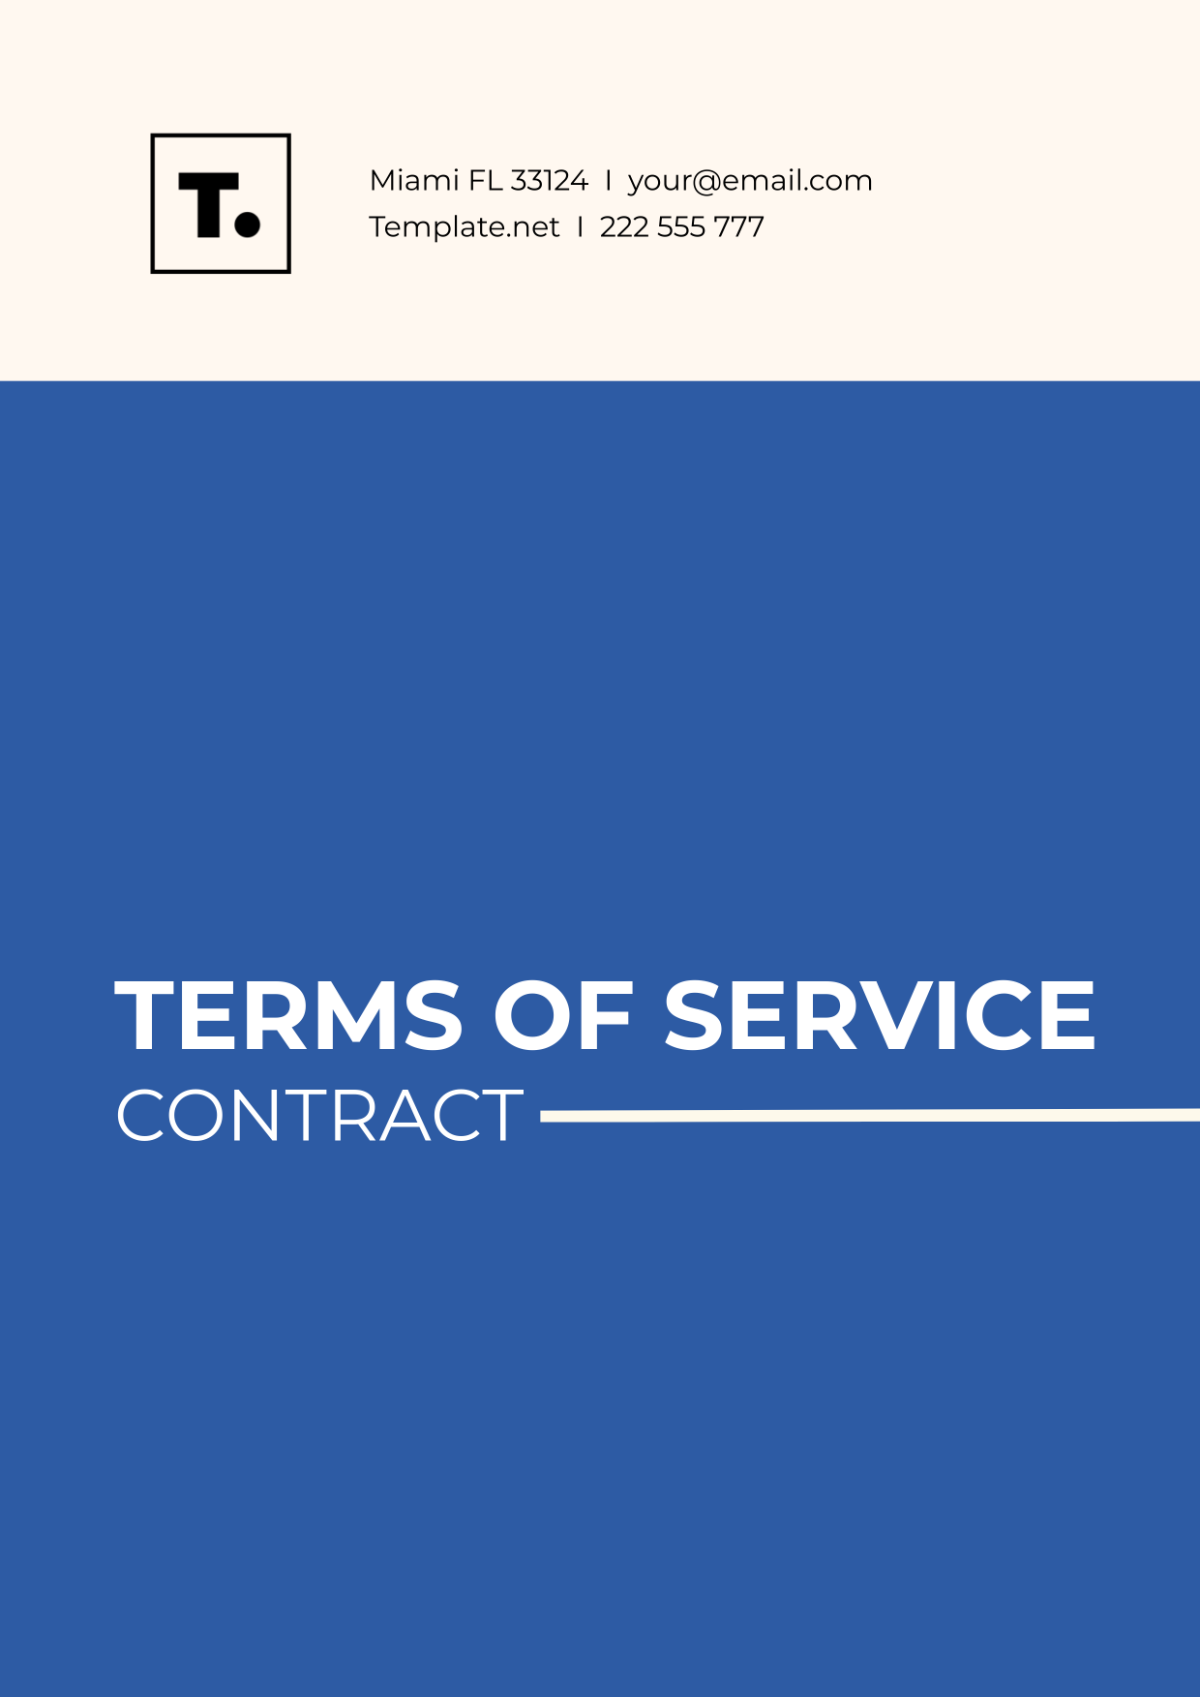 Terms Of Service Contract Template